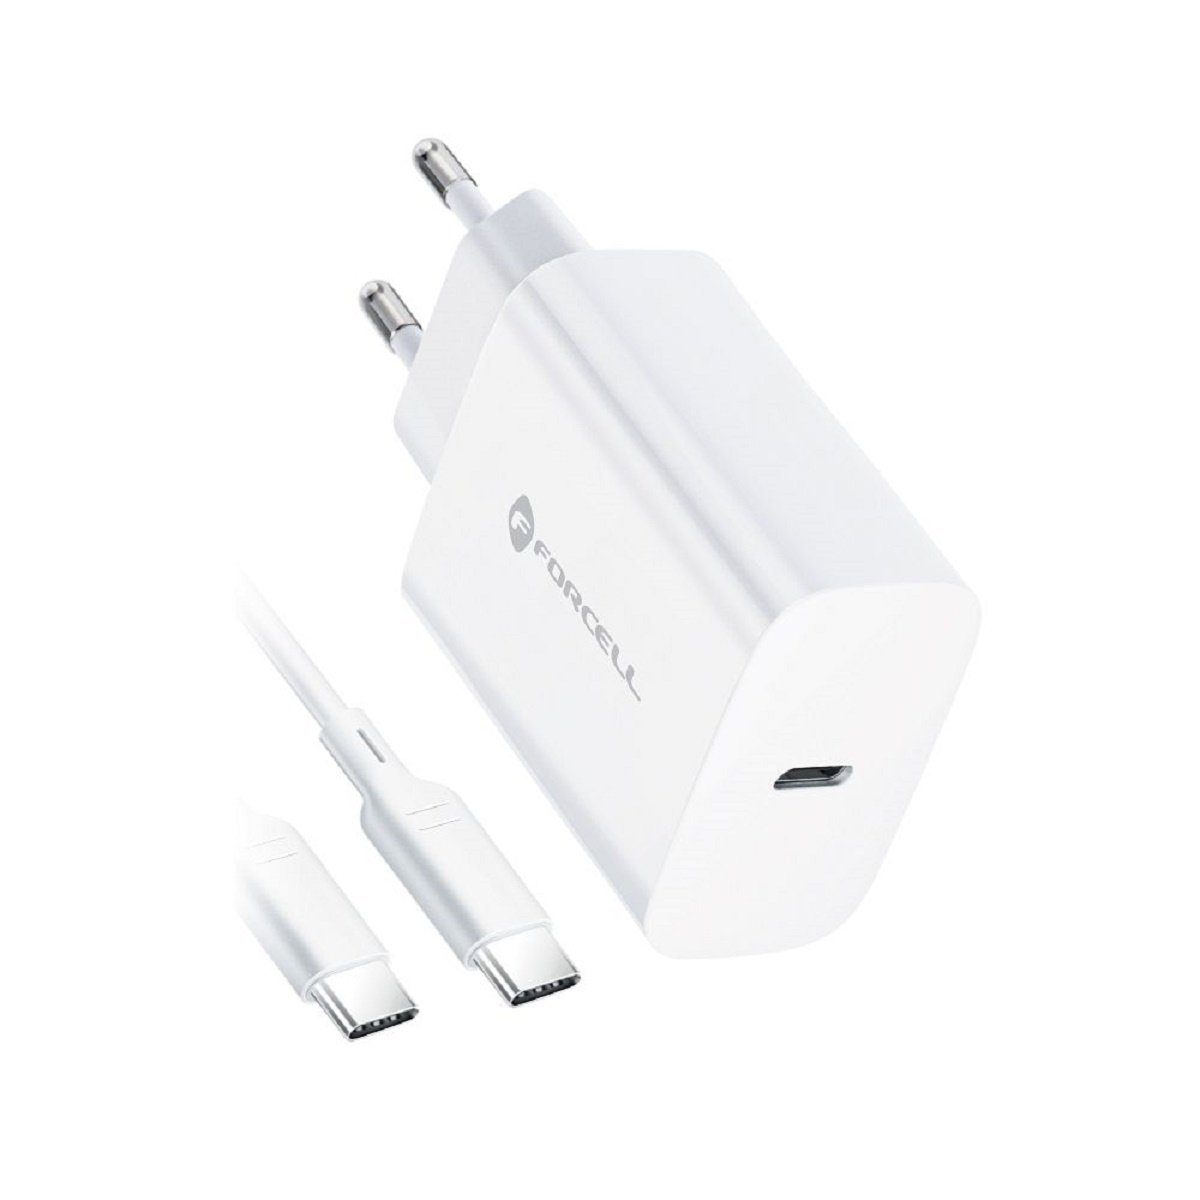 Forcell NETZ-Ladegerät mit USB Typ C Kabel - 3A 20W Quick Charge 4.0  Smartphone-Ladegerät